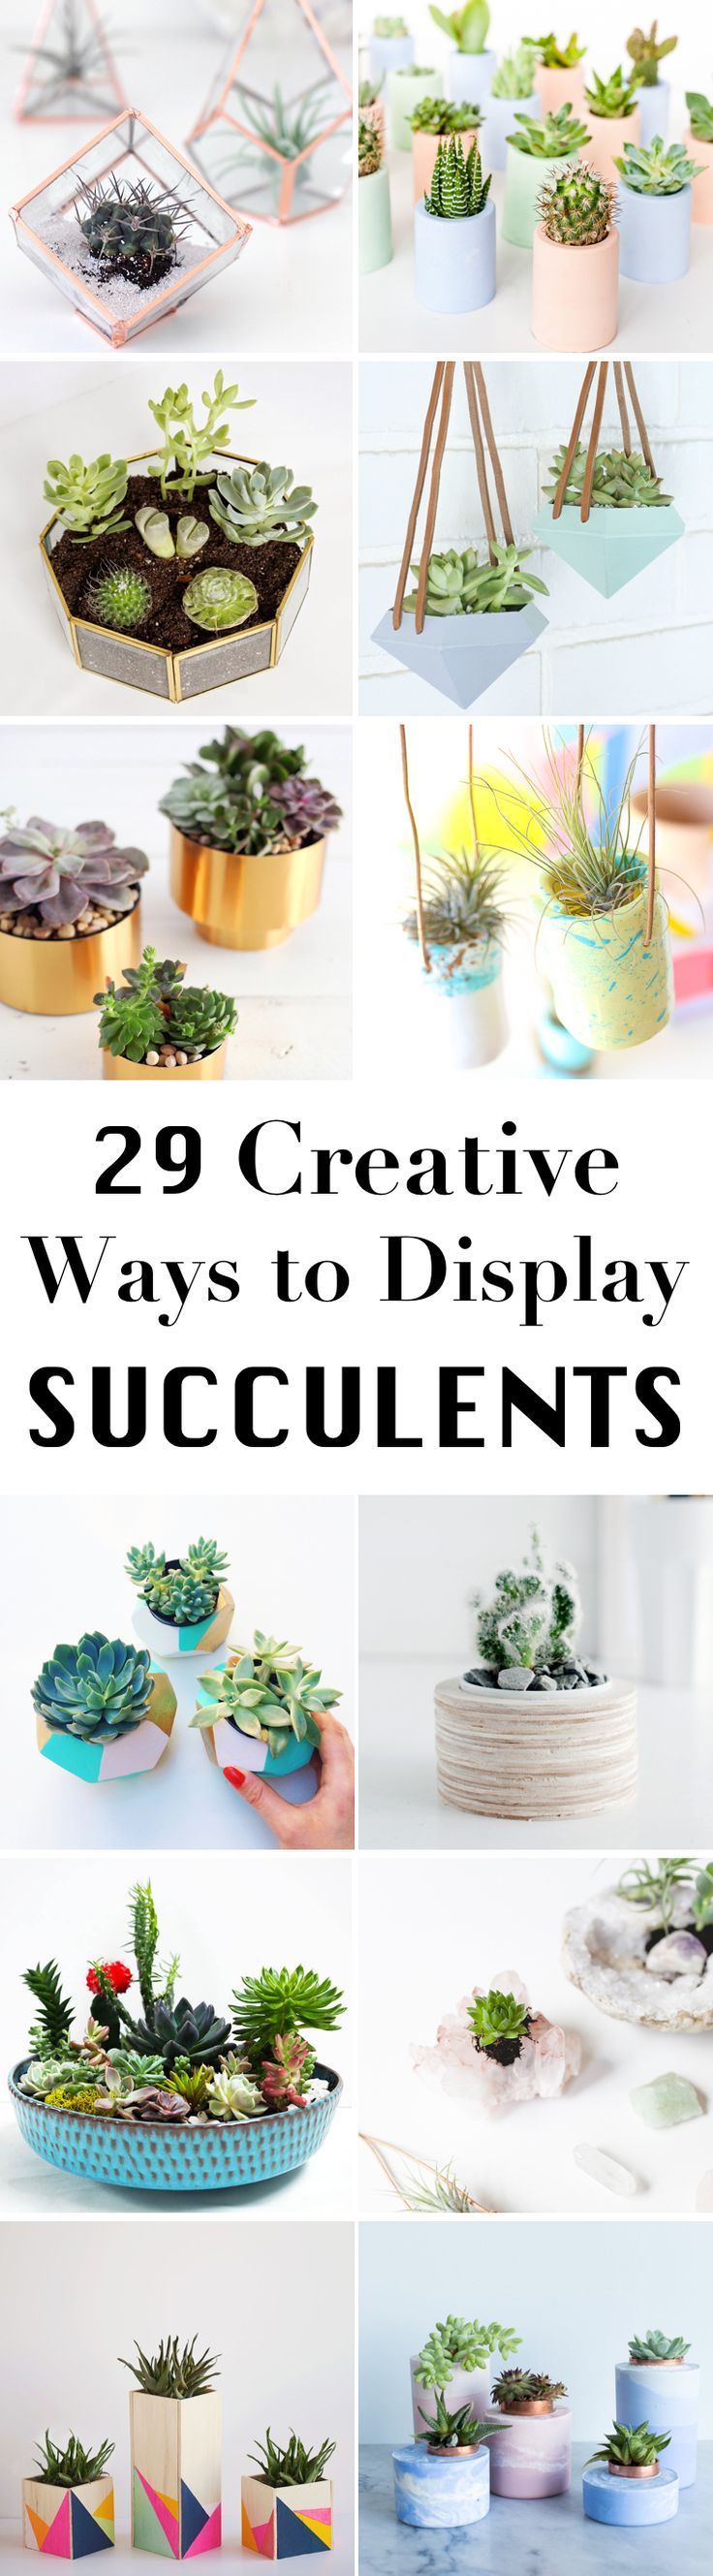 Succulent plants are perfect for decorating your home. Here are 29 ridiculously cute and easy DIY succulent planter ideas.